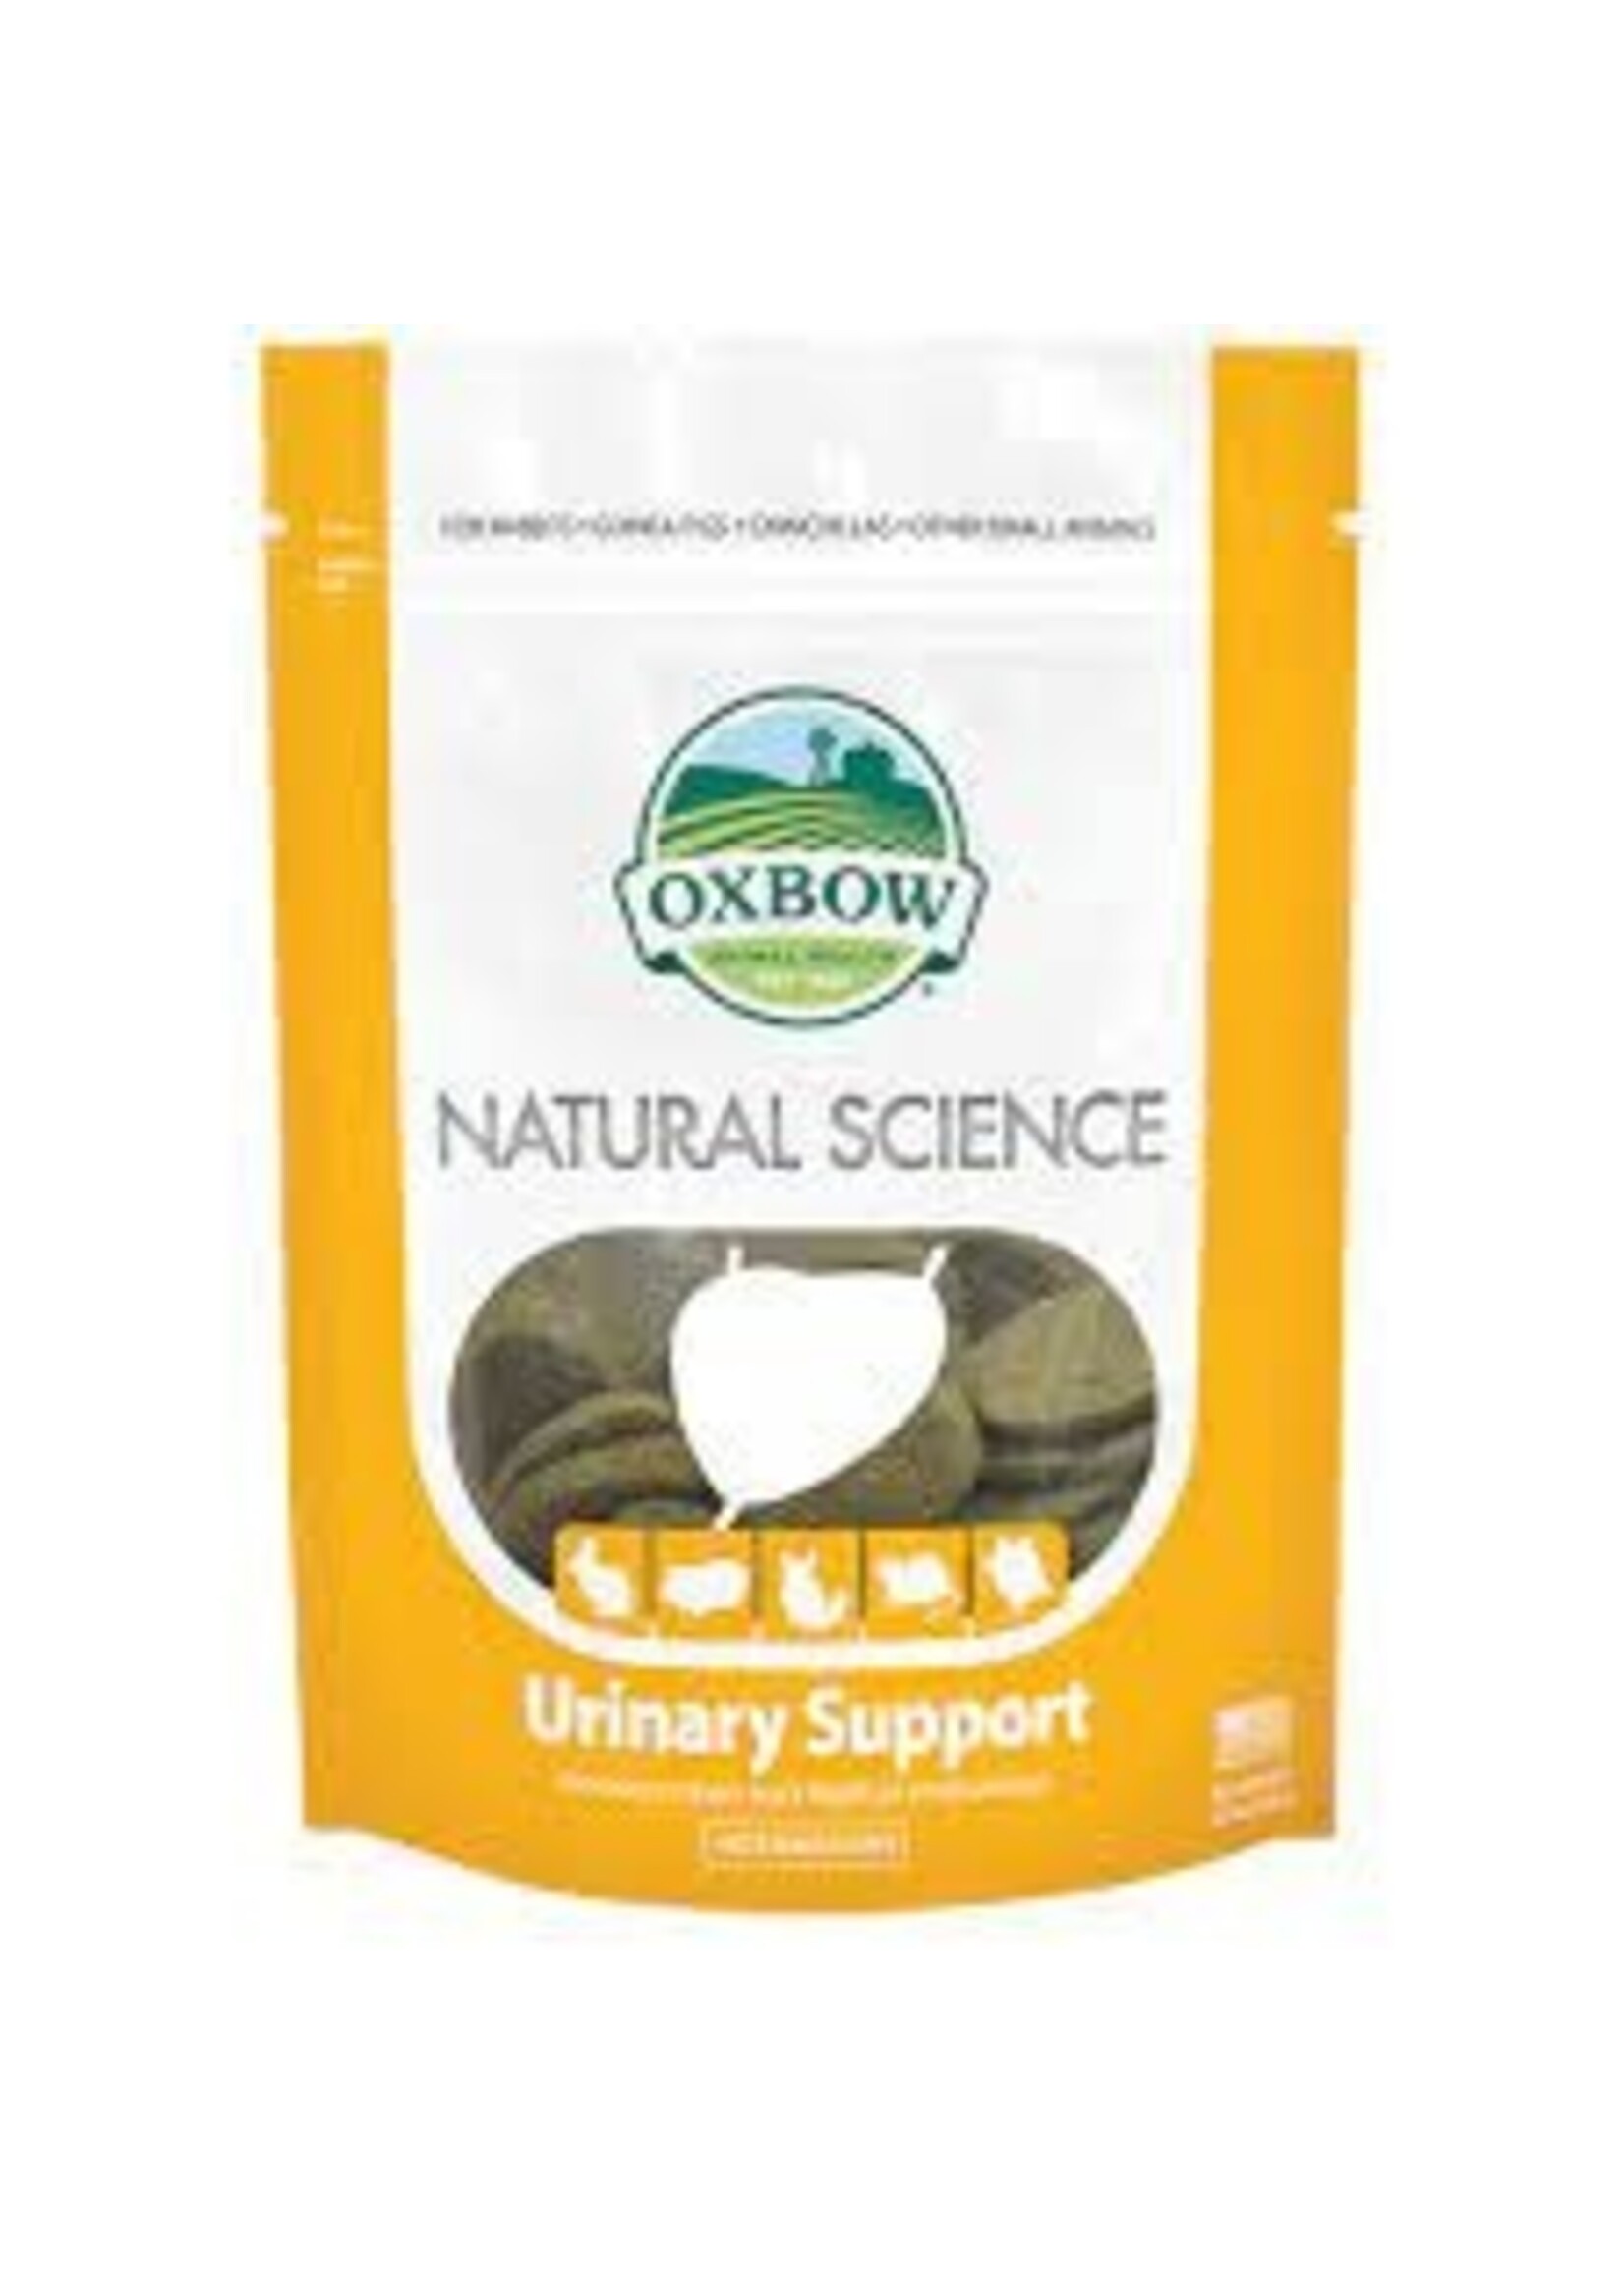 Oxbow Oxbow Natural Science Urinary Supplement 60ct